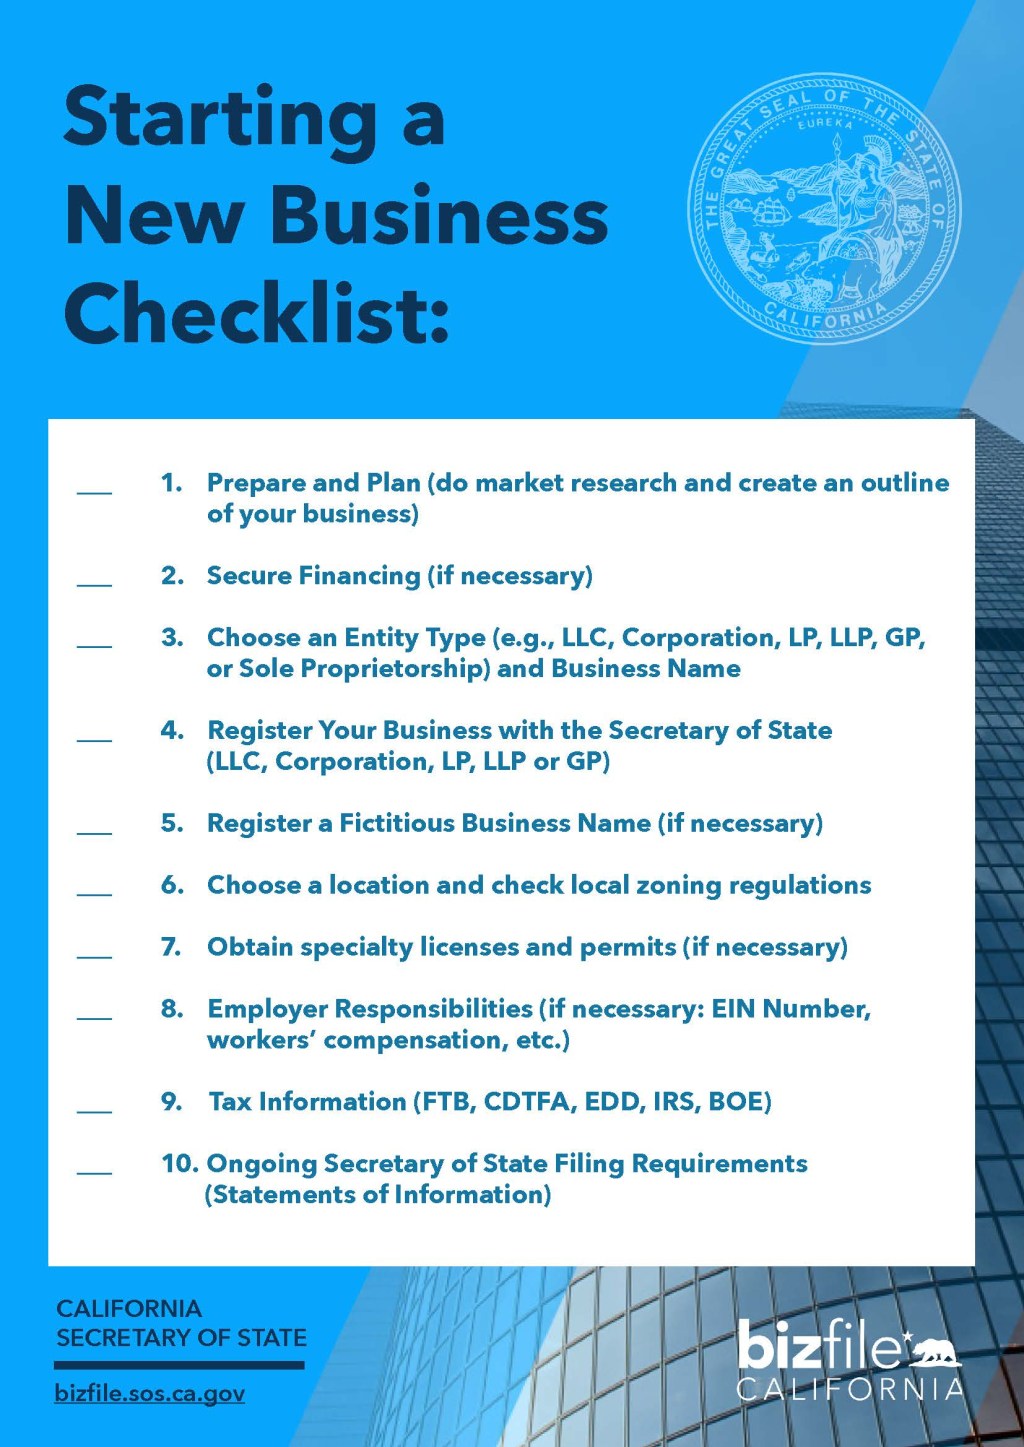 Picture of: Starting a Business Checklist :: California Secretary of State